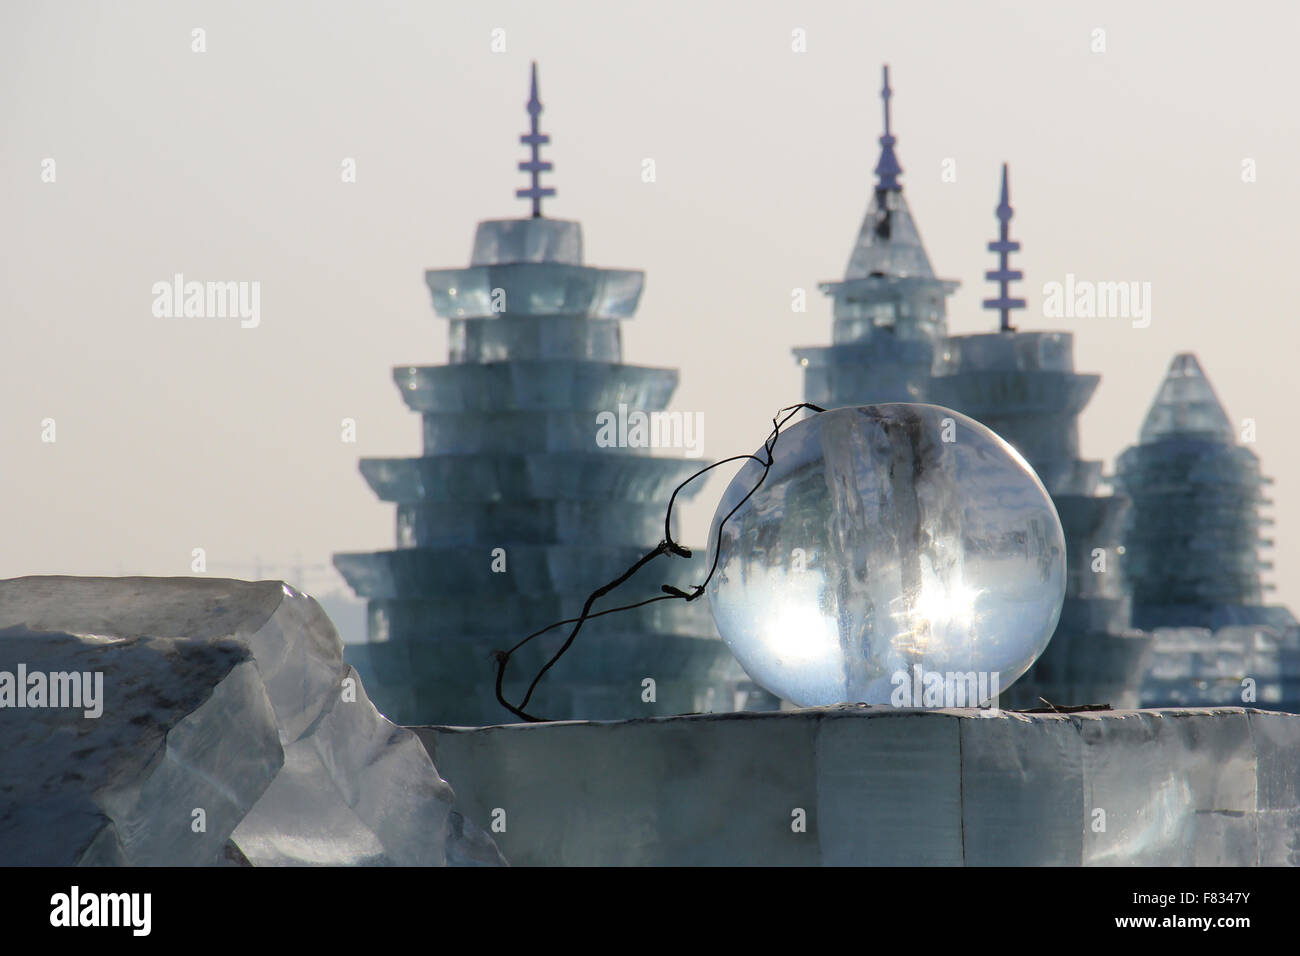 https://c8.alamy.com/comp/F8347Y/ice-ball-in-front-of-ice-buildings-in-harbin-china-F8347Y.jpg